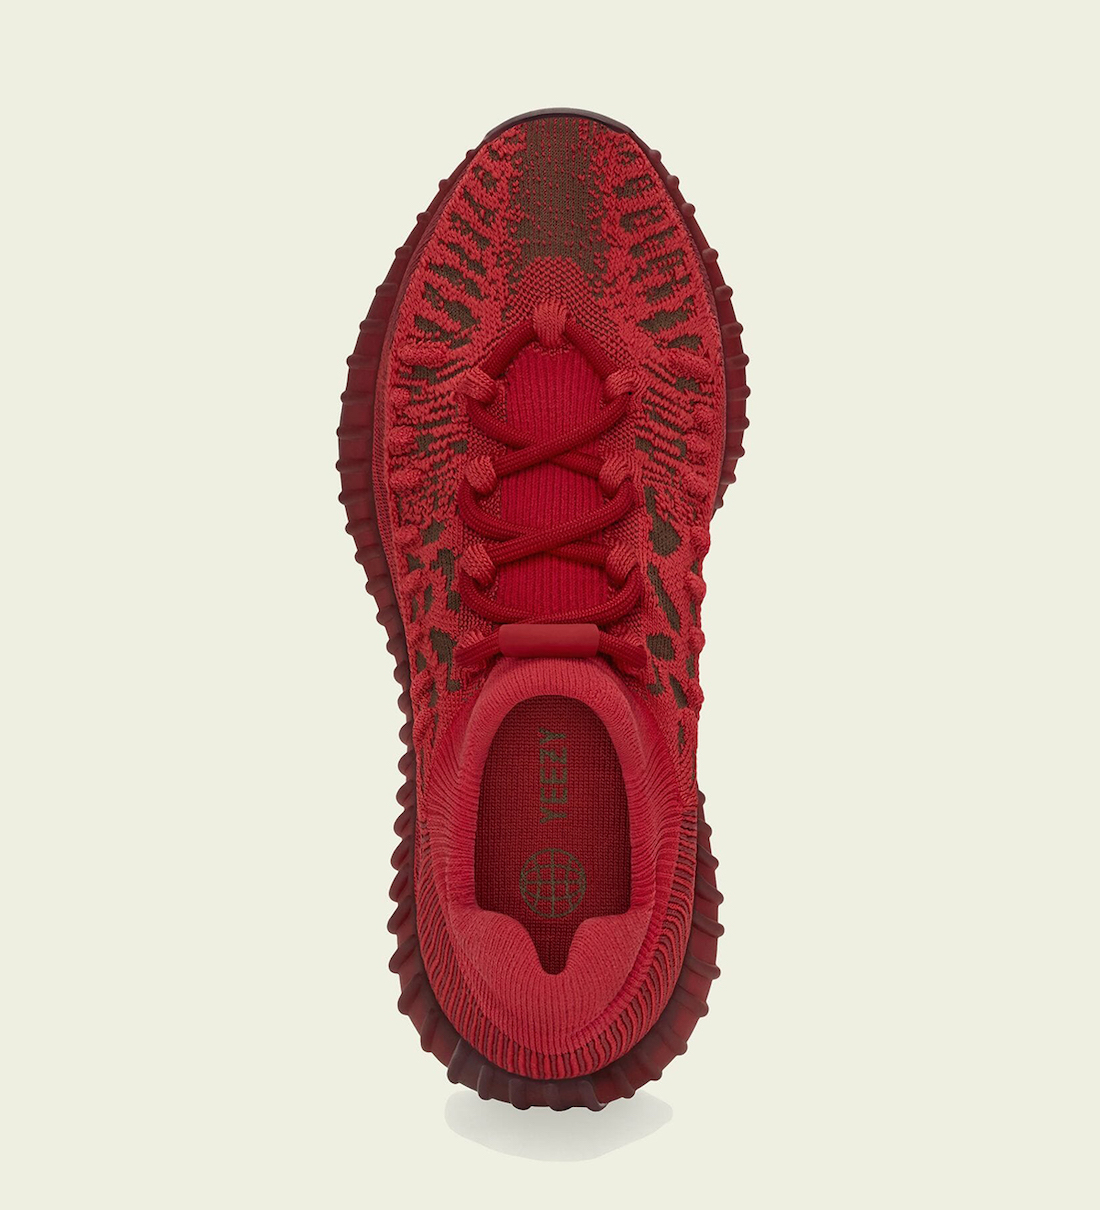 adidas Yeezy Boost 350 V2 CMPCT Slate Red GW6945 Release Details